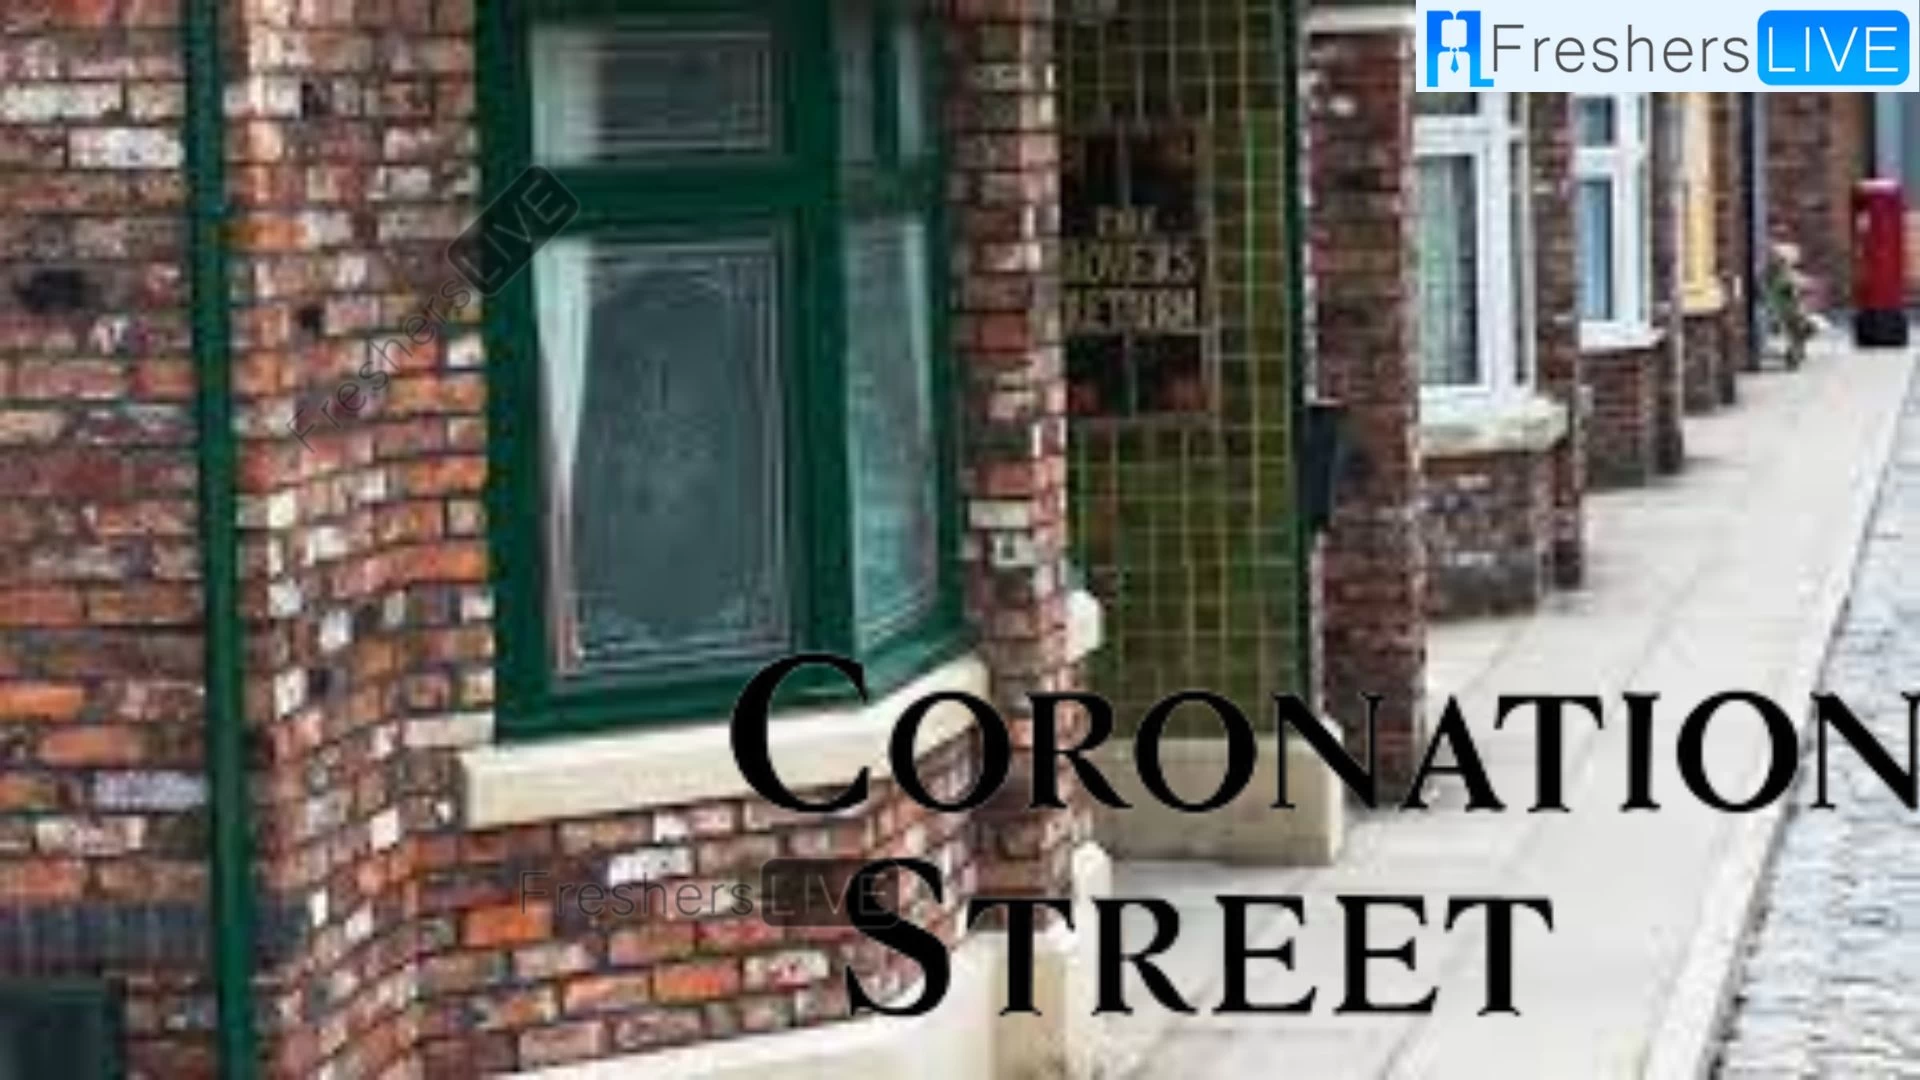 Is Coronation Street on Tonight? Why is Coronation Street on Tonight?